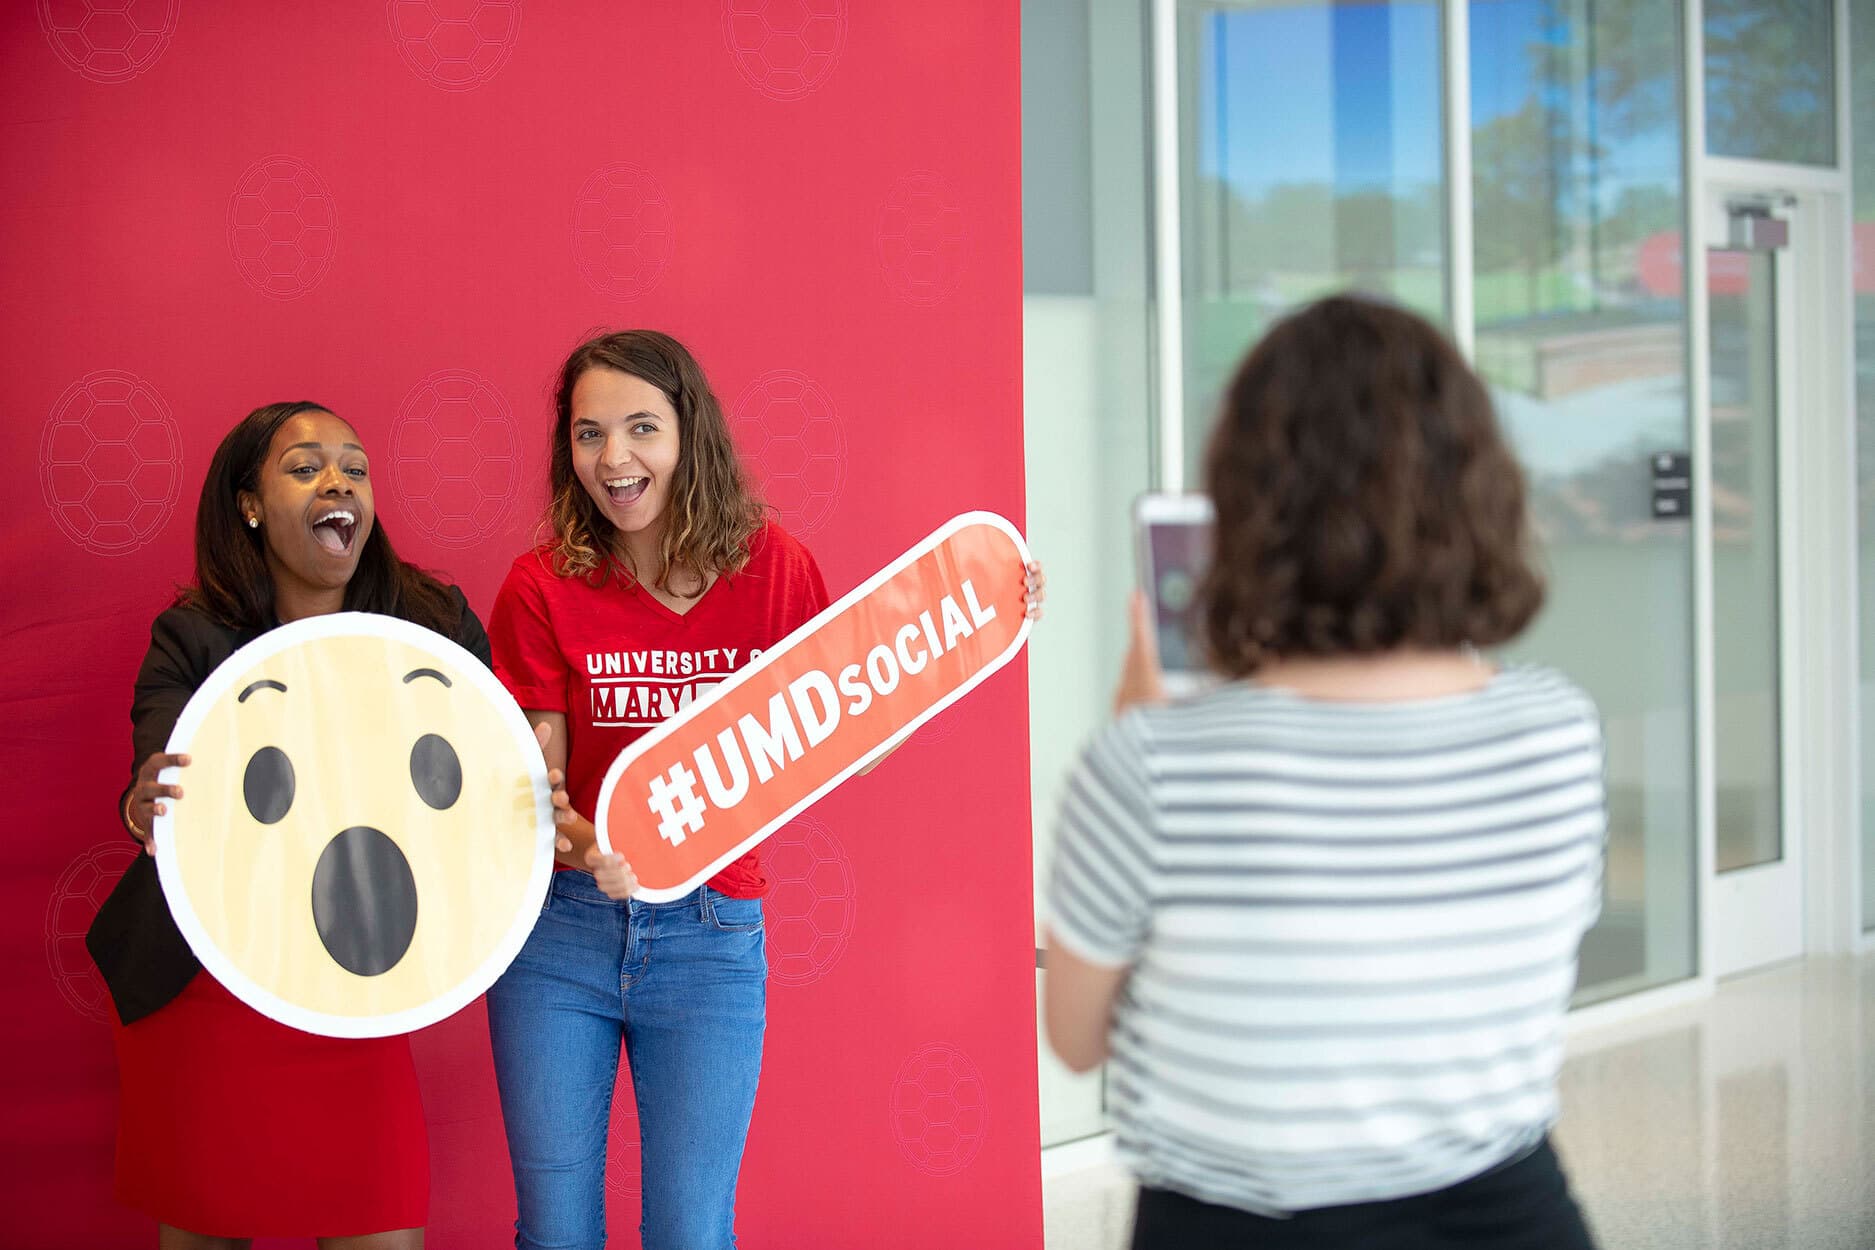 Two conference attendees take a photo while holding props of the Wow face emoji, and the event's hashtag UMDSocial